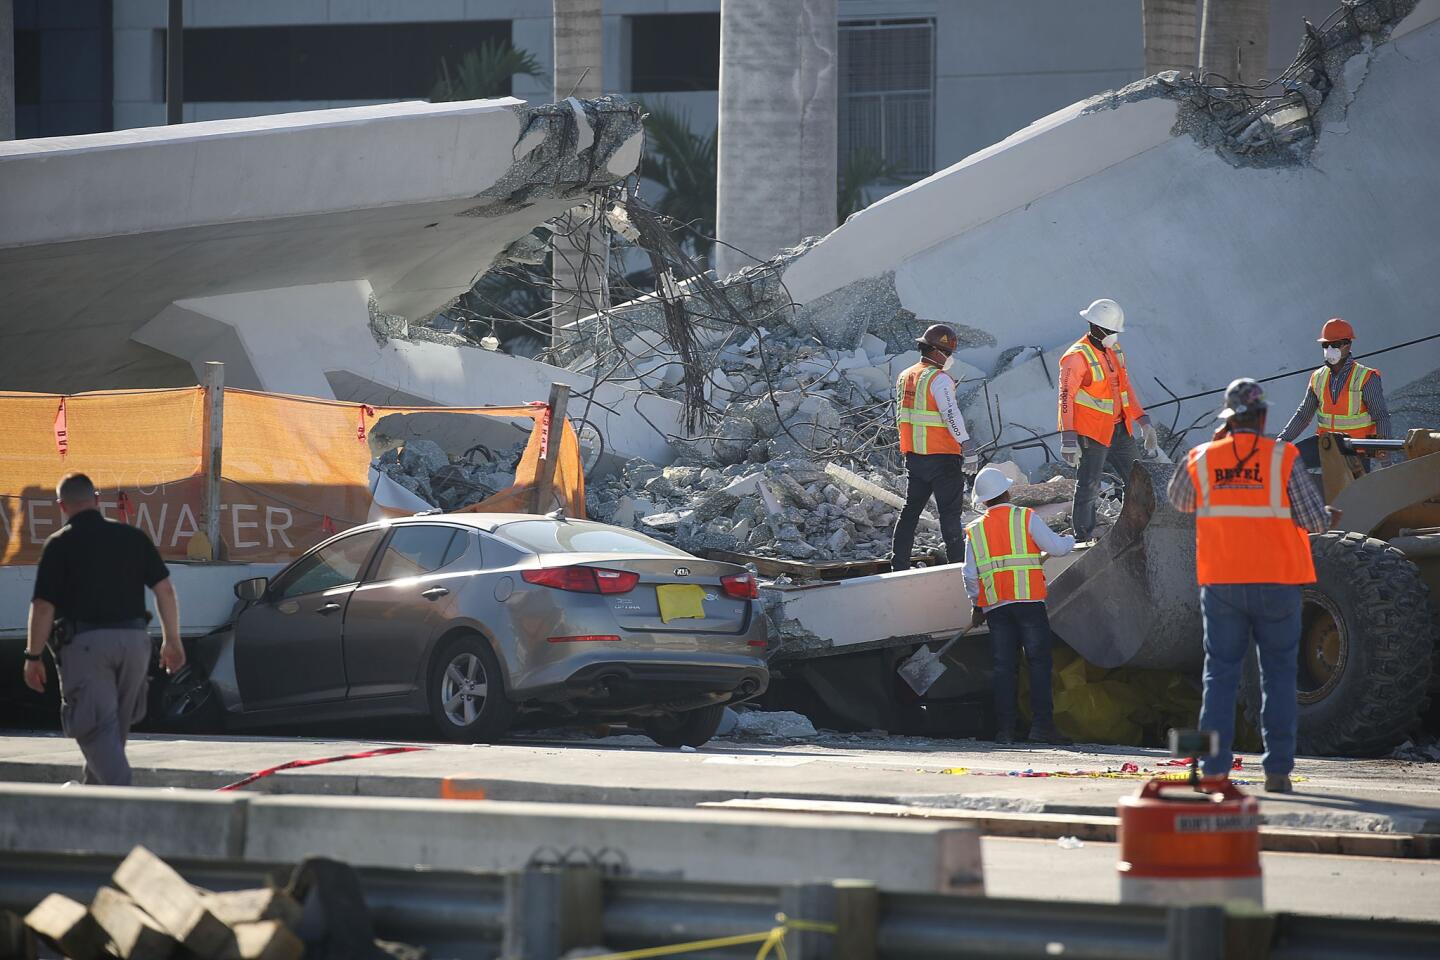 MIAMI, FL - MARCH 16: Workers, law enforcement and members of the National Transportation Safety Board investigate the scene where a pedestrian bridge collapsed a few days after it was built over southwest 8th street allowing people to bypass the busy street to reach Florida International University on March 16, 2018 in Miami, Florida. Reports indicate that there are six fatalities as a result of the collapse.